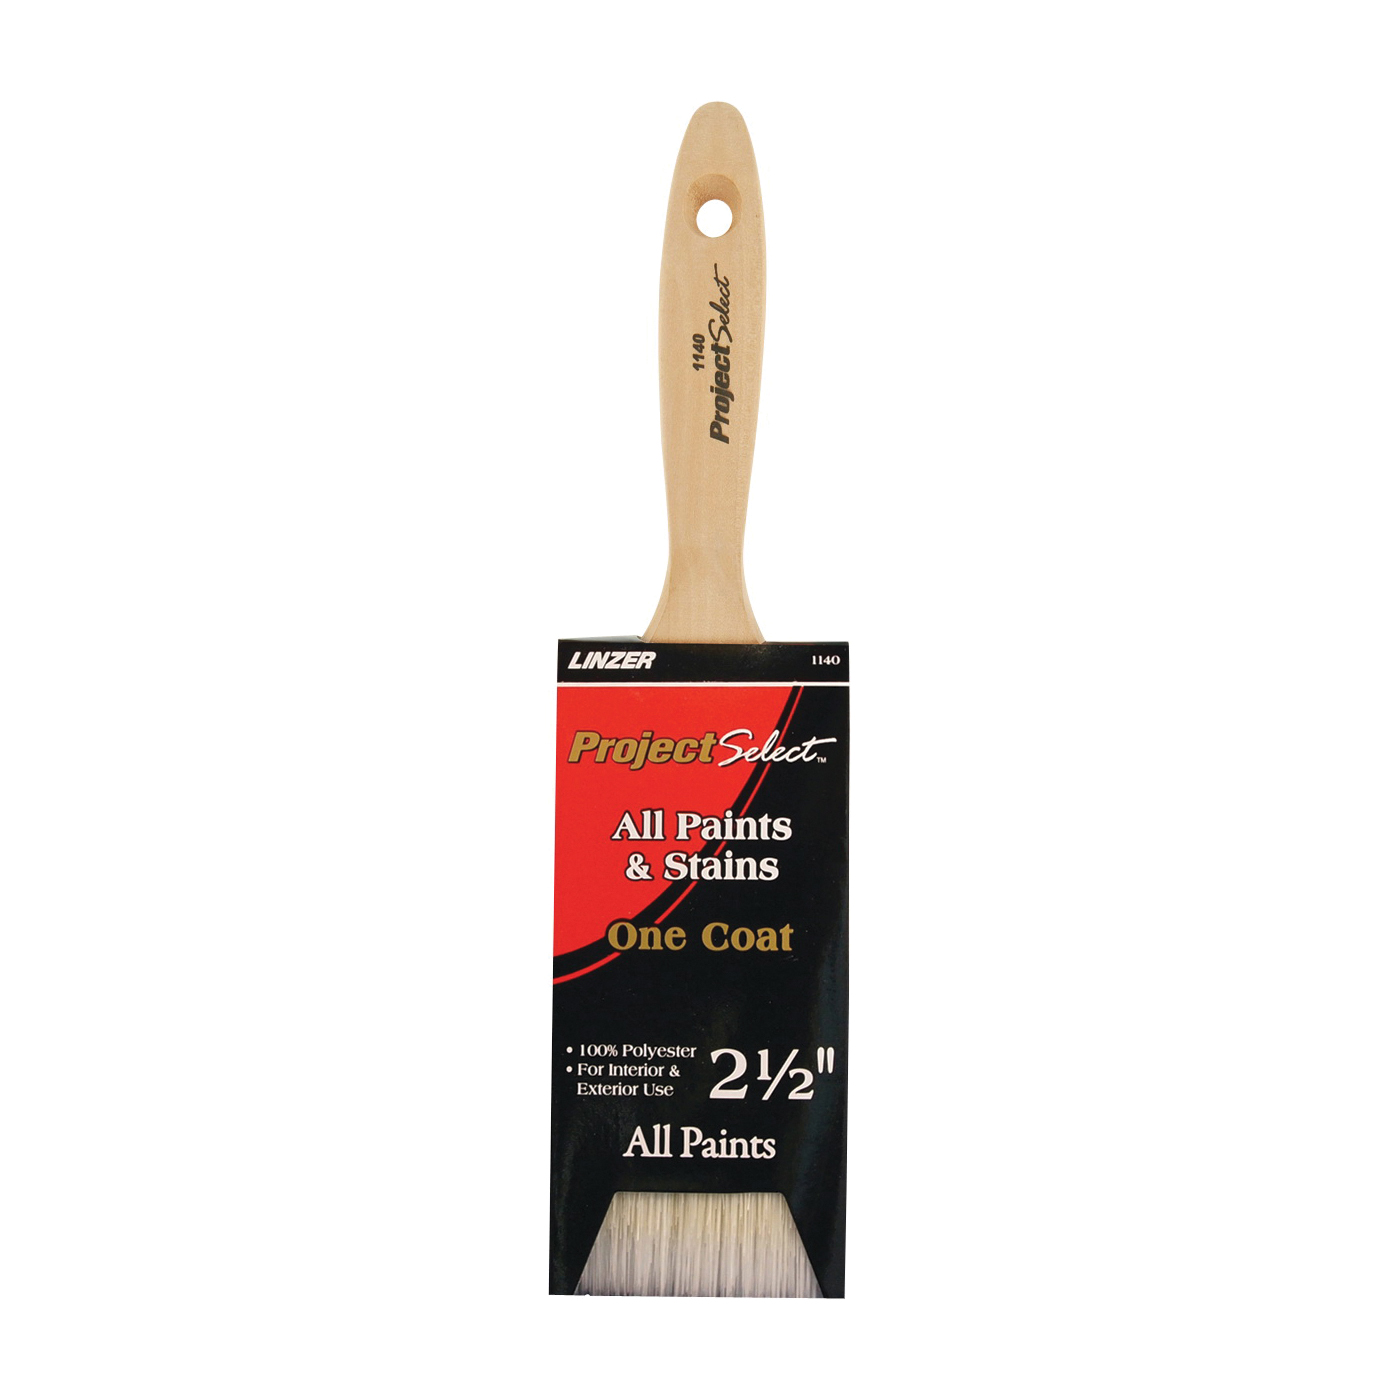 WC 1140-2.5 Paint Brush, 2-1/2 in W, 3 in L Bristle, Varnish Handle